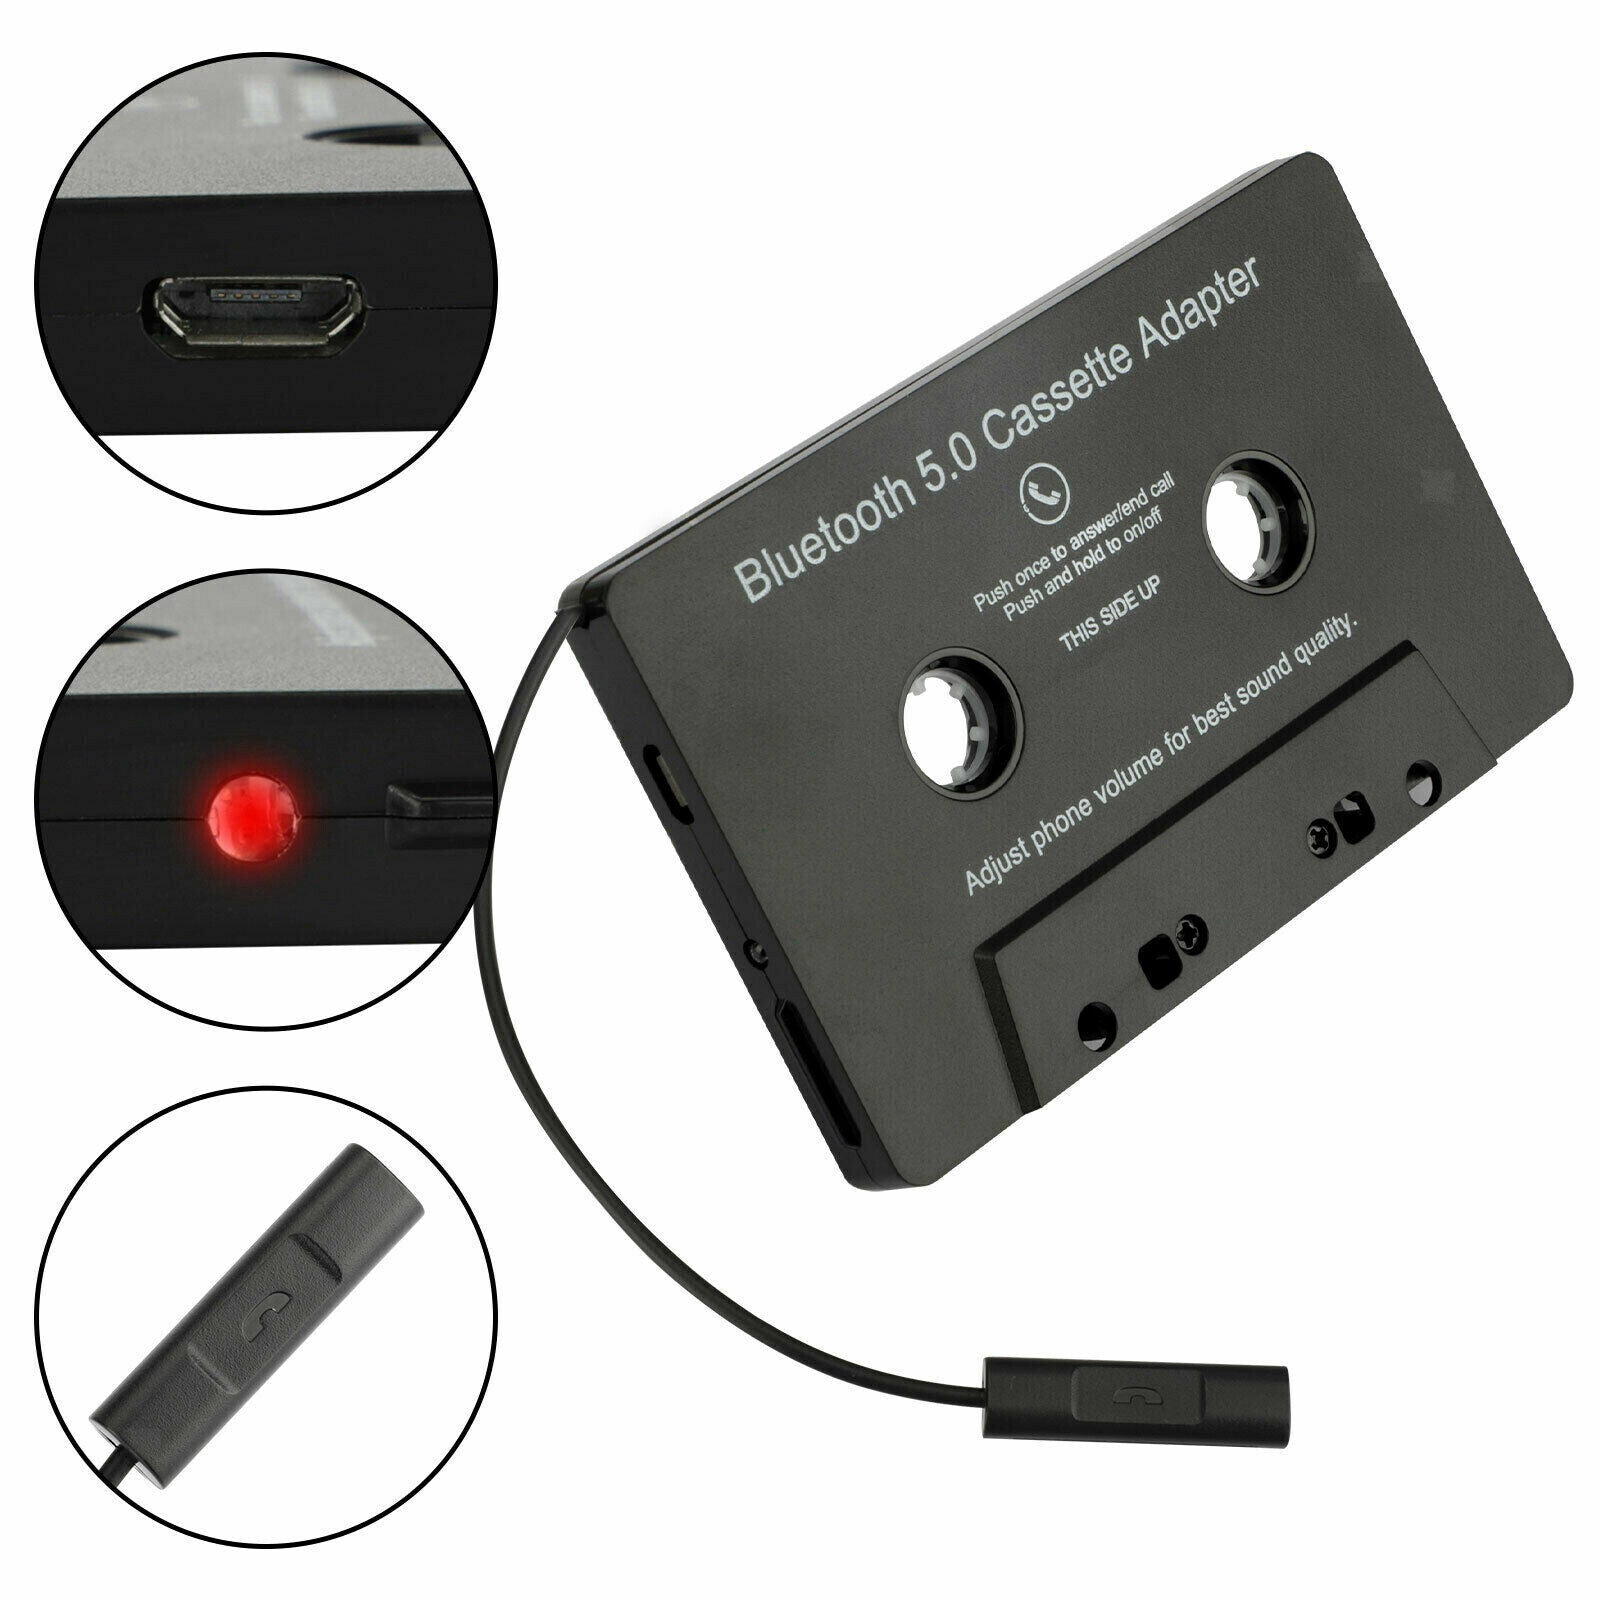 Universal Cassette to Aux Adapter with Stereo Audio Premium with 3.5mm Headphone